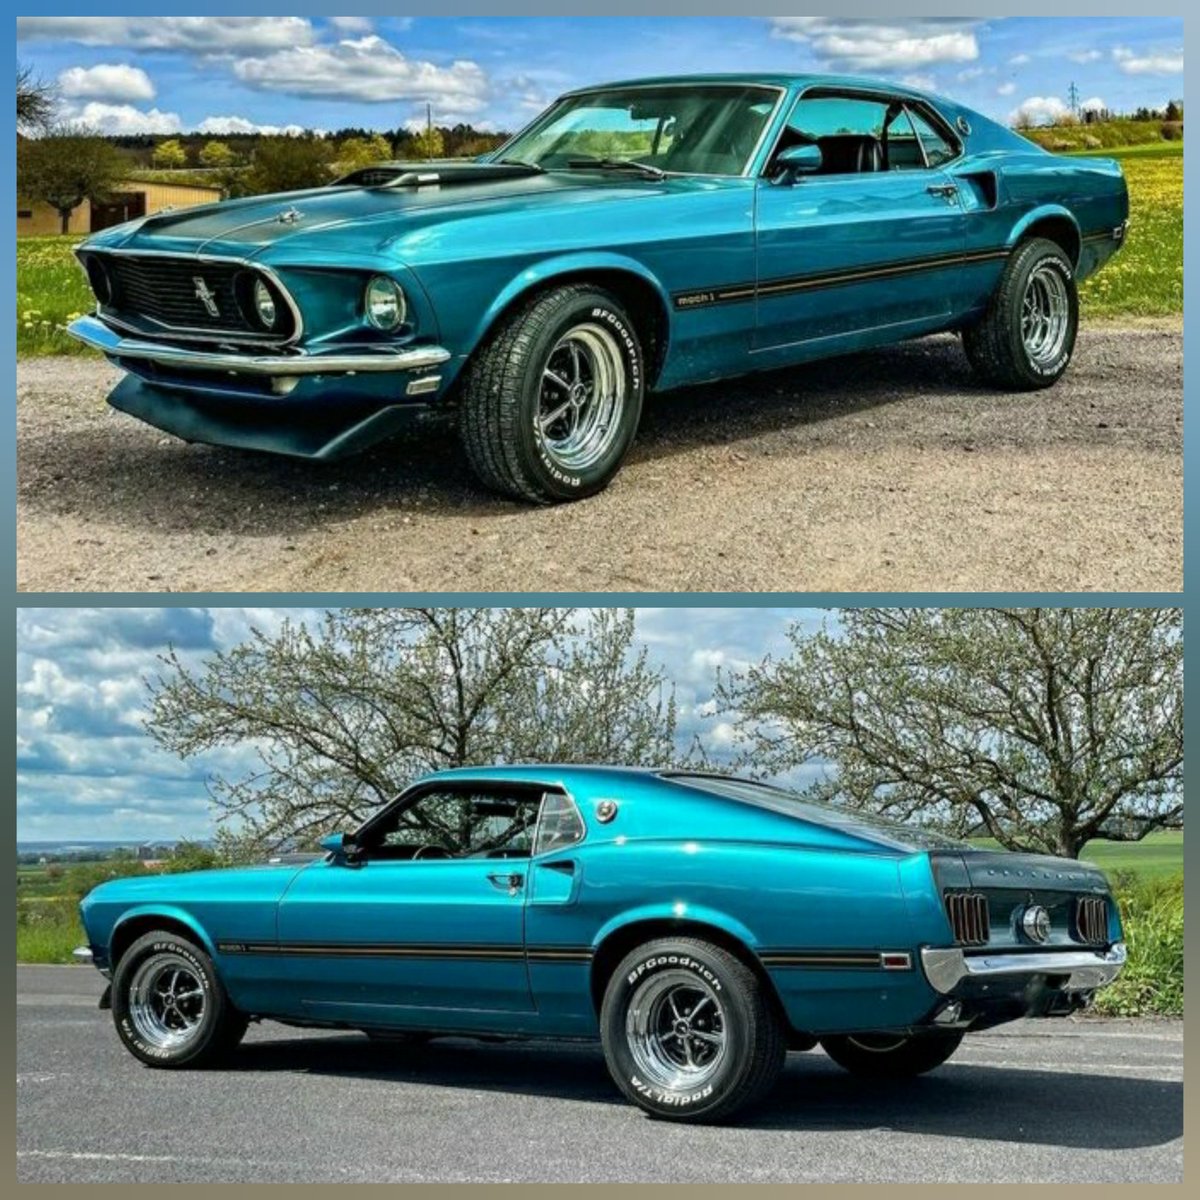 Stunning 69 Mach1

#Ford #fordmustang #classiccars #AmericanMuscle #v8